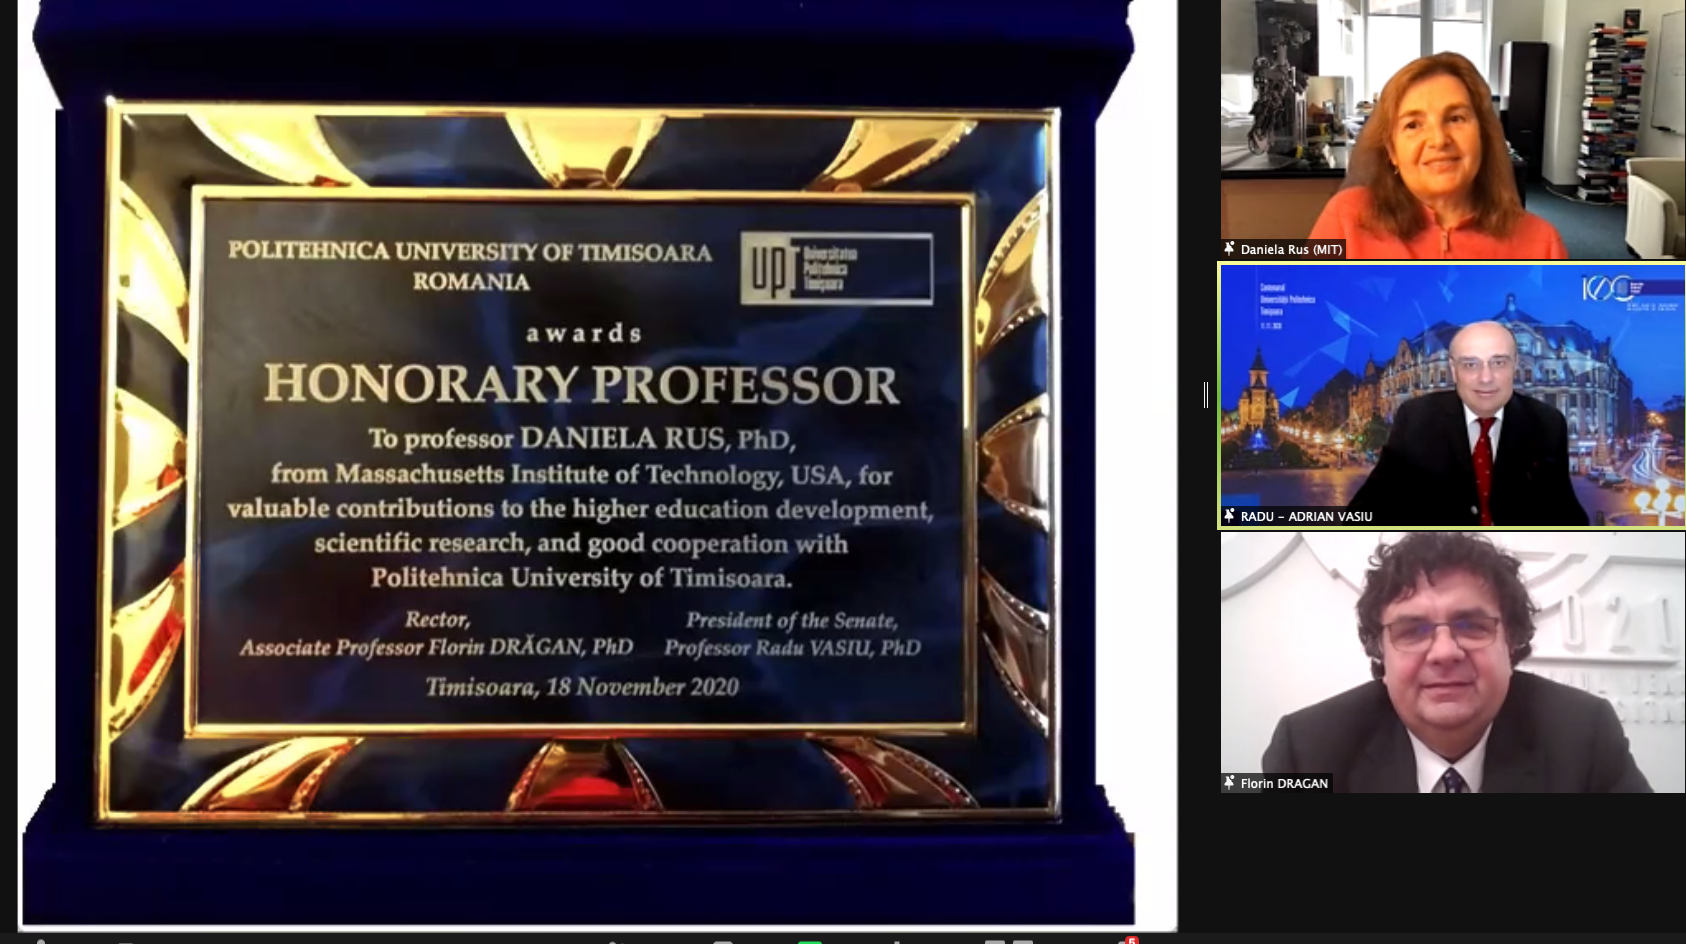 #impreunaonline webinar: Artificial intelligence and impact on society - with Prof. Daniela Rus, MIT